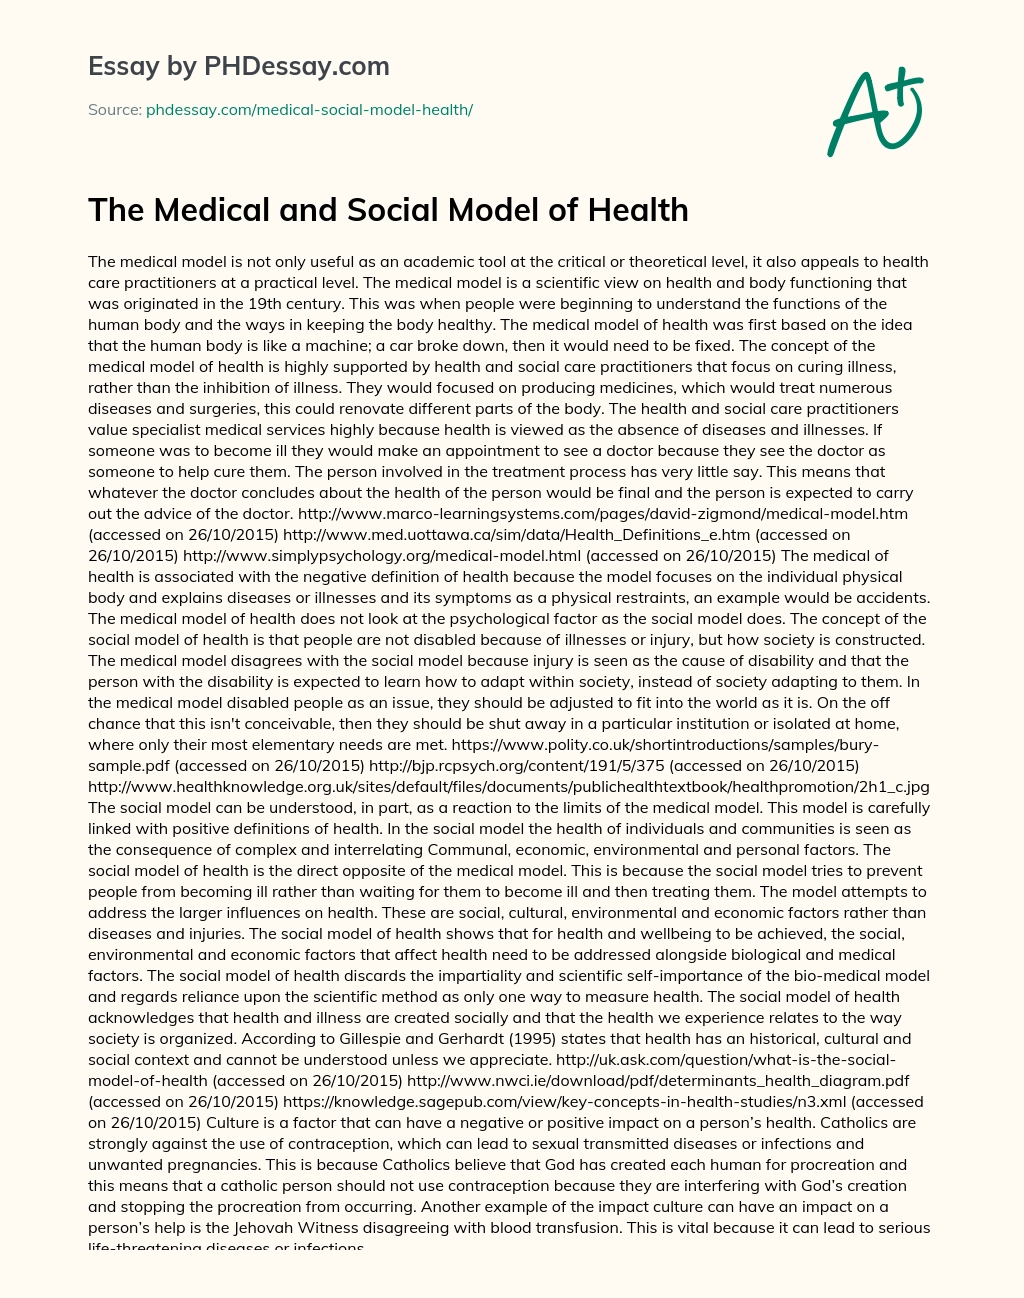 The Medical and Social Model of Health essay